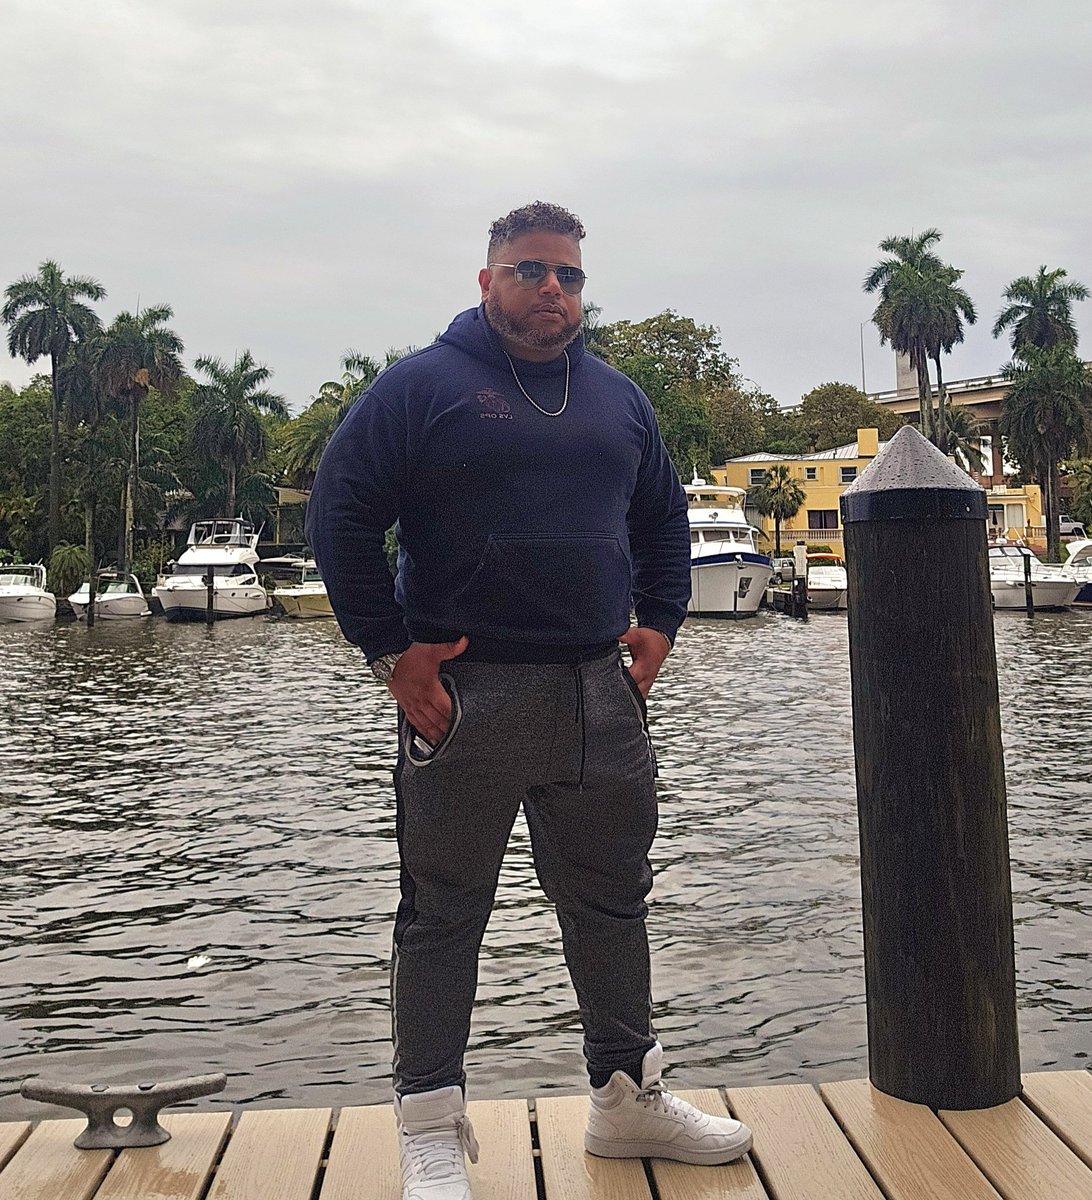 Minutes before back flipping into the #MiamiRiver and catching a fish with my bare hands. #Miami #MiamiDadeCounty #Allapattah